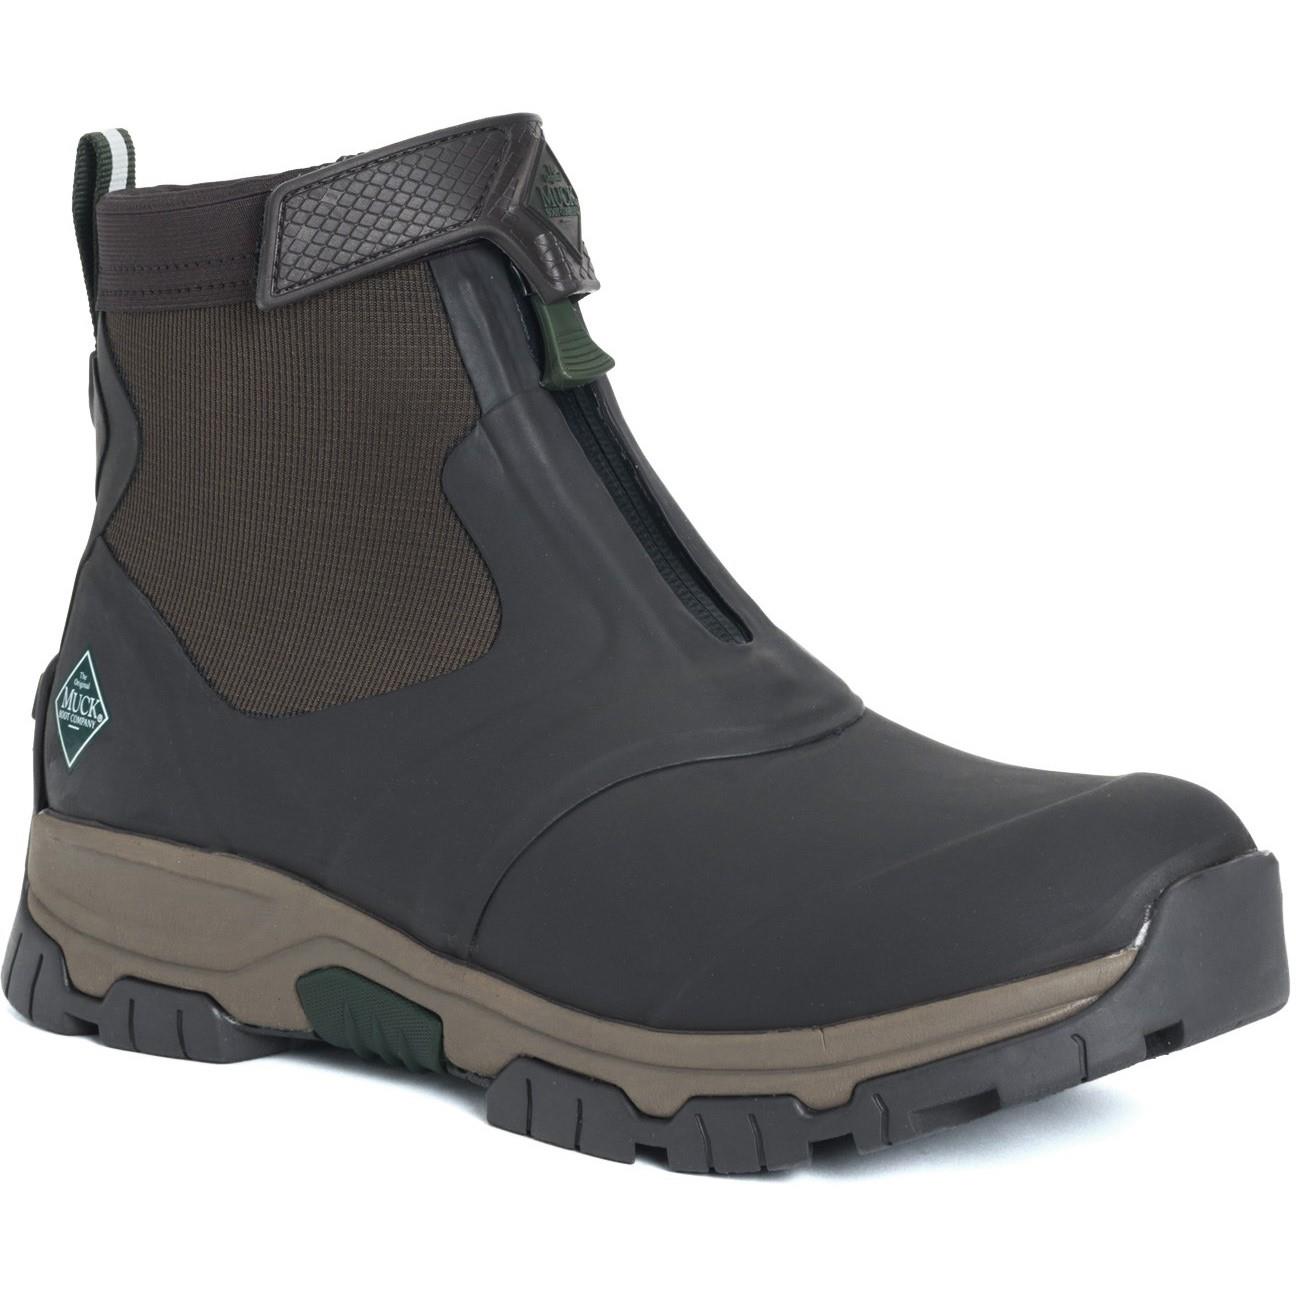 Muck Boots Apex Mid Zip brown waterproof breathable ankle boots